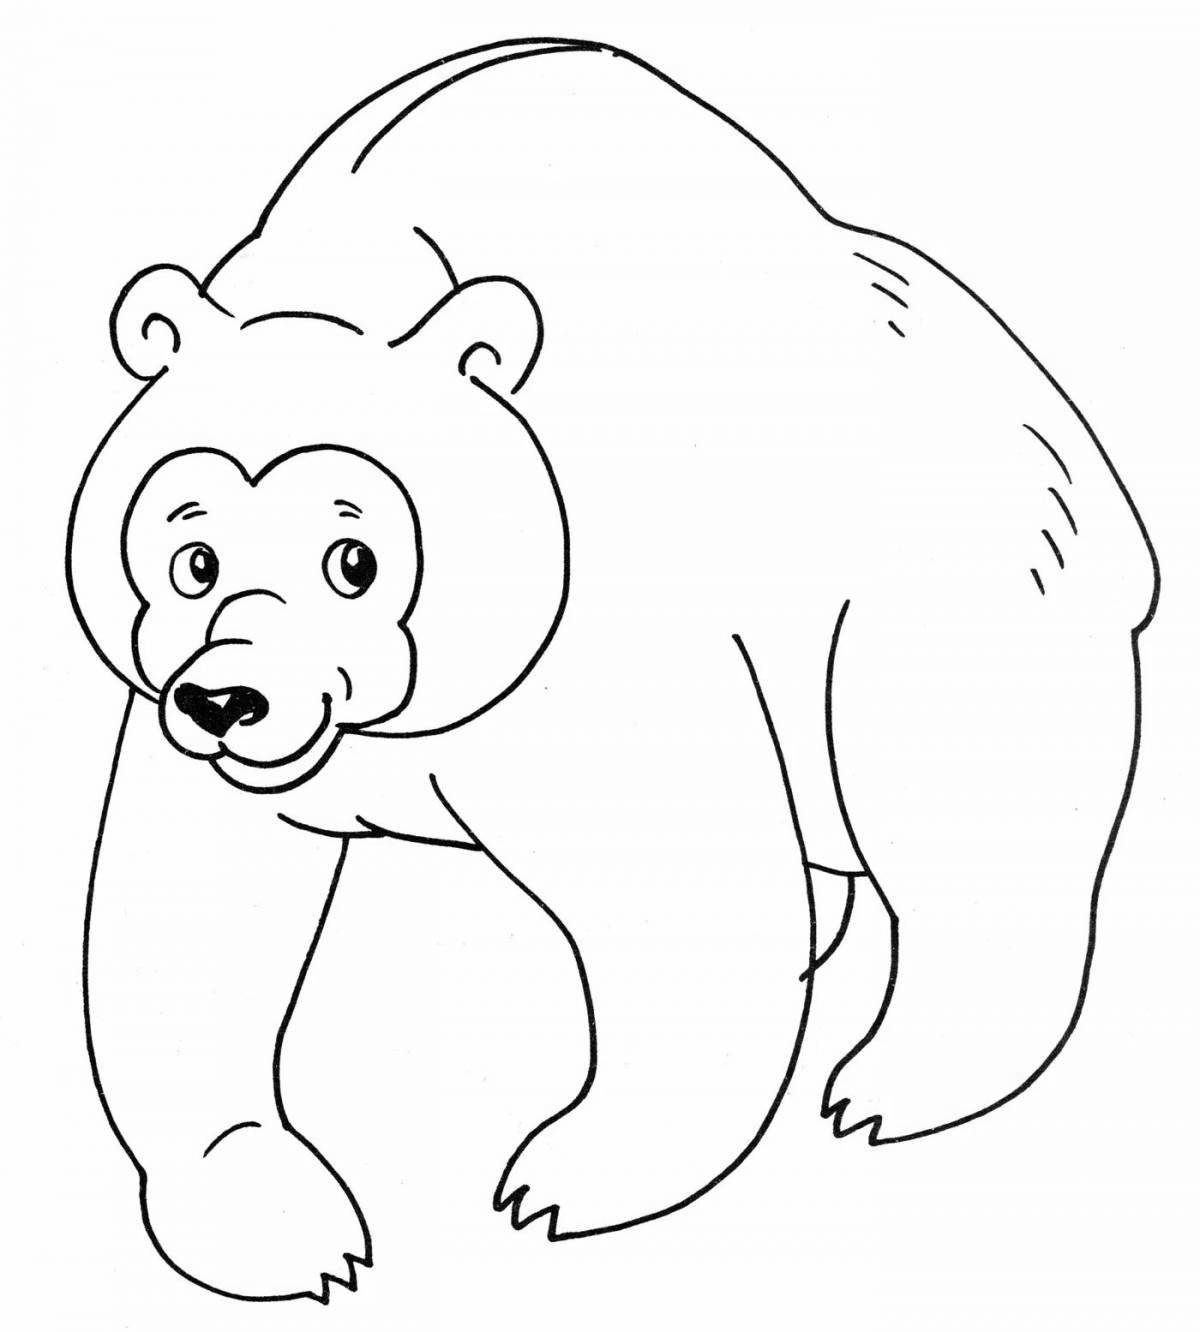 Outgoing clumsy bear coloring